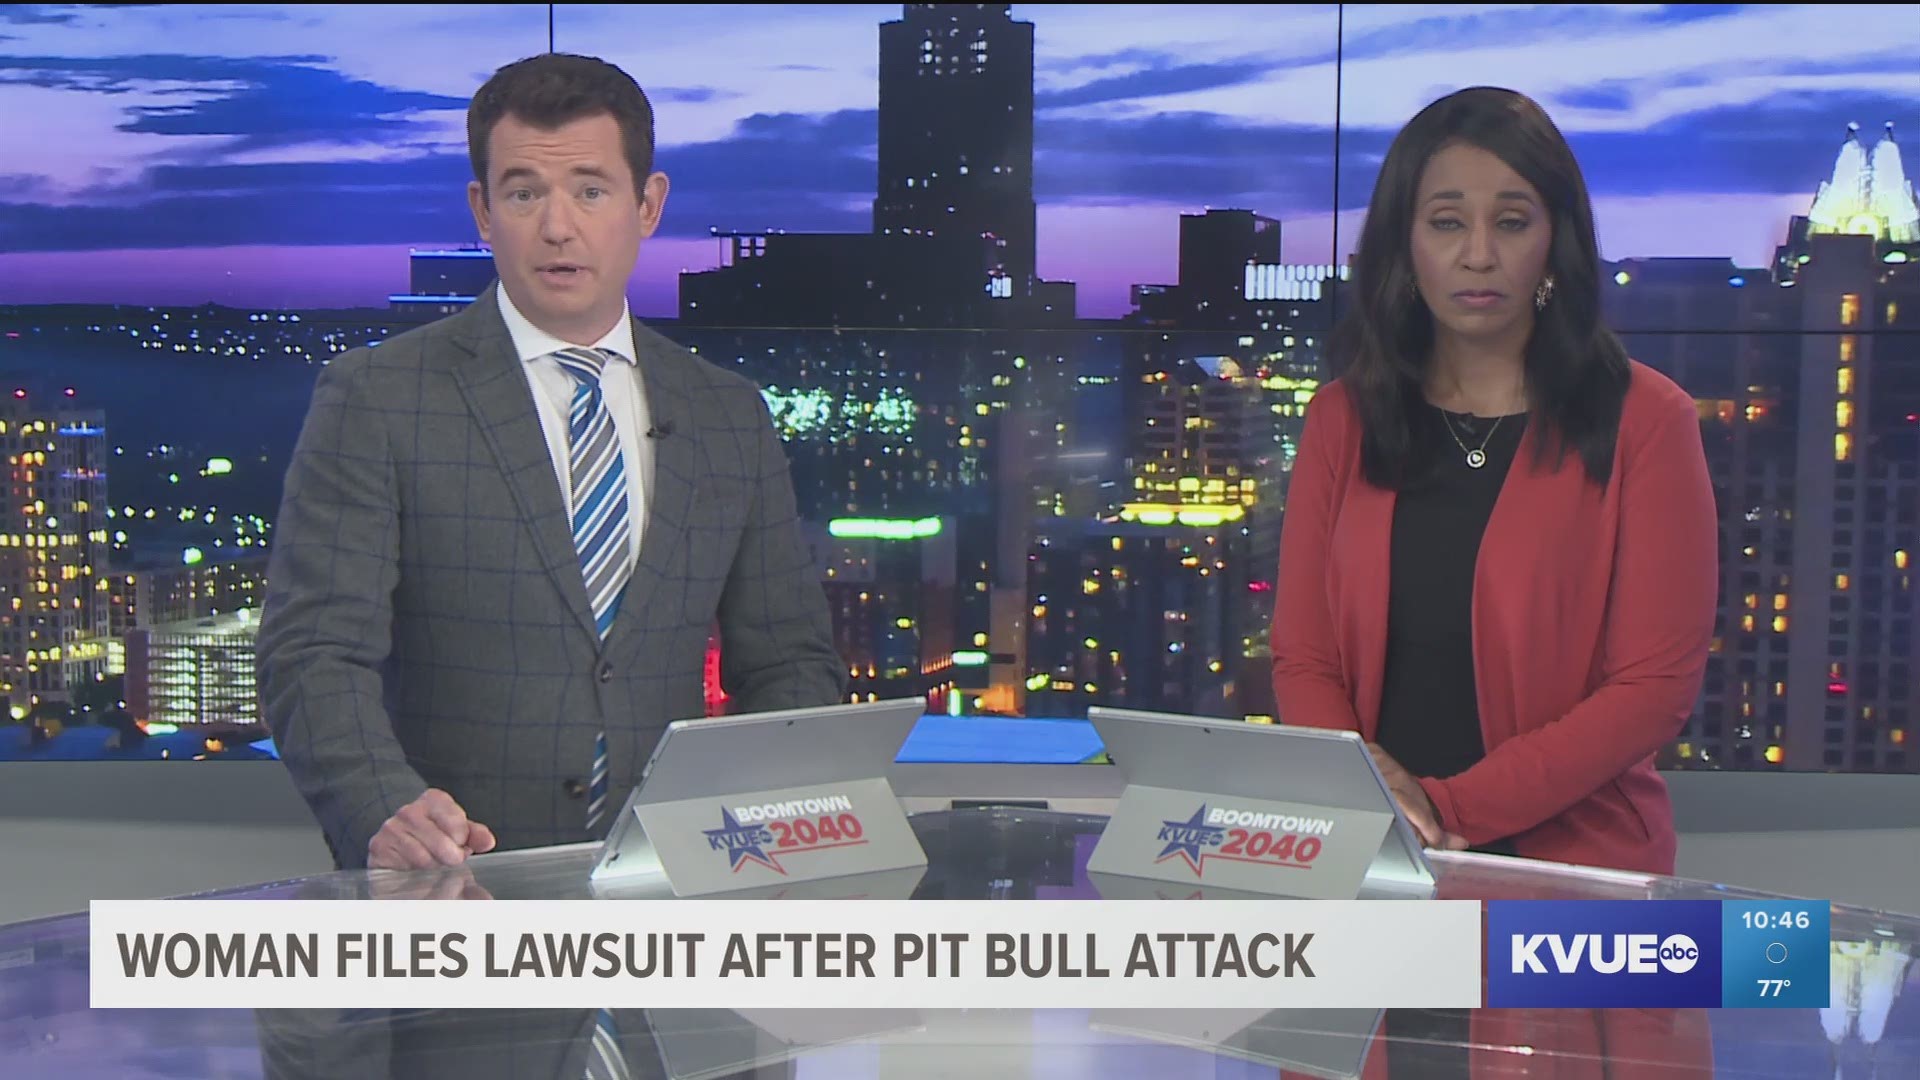 An Austin woman was left bloodied and bruised after a walk on a trail. She said a pair of pit bulls attacked her while she was walking her dog.